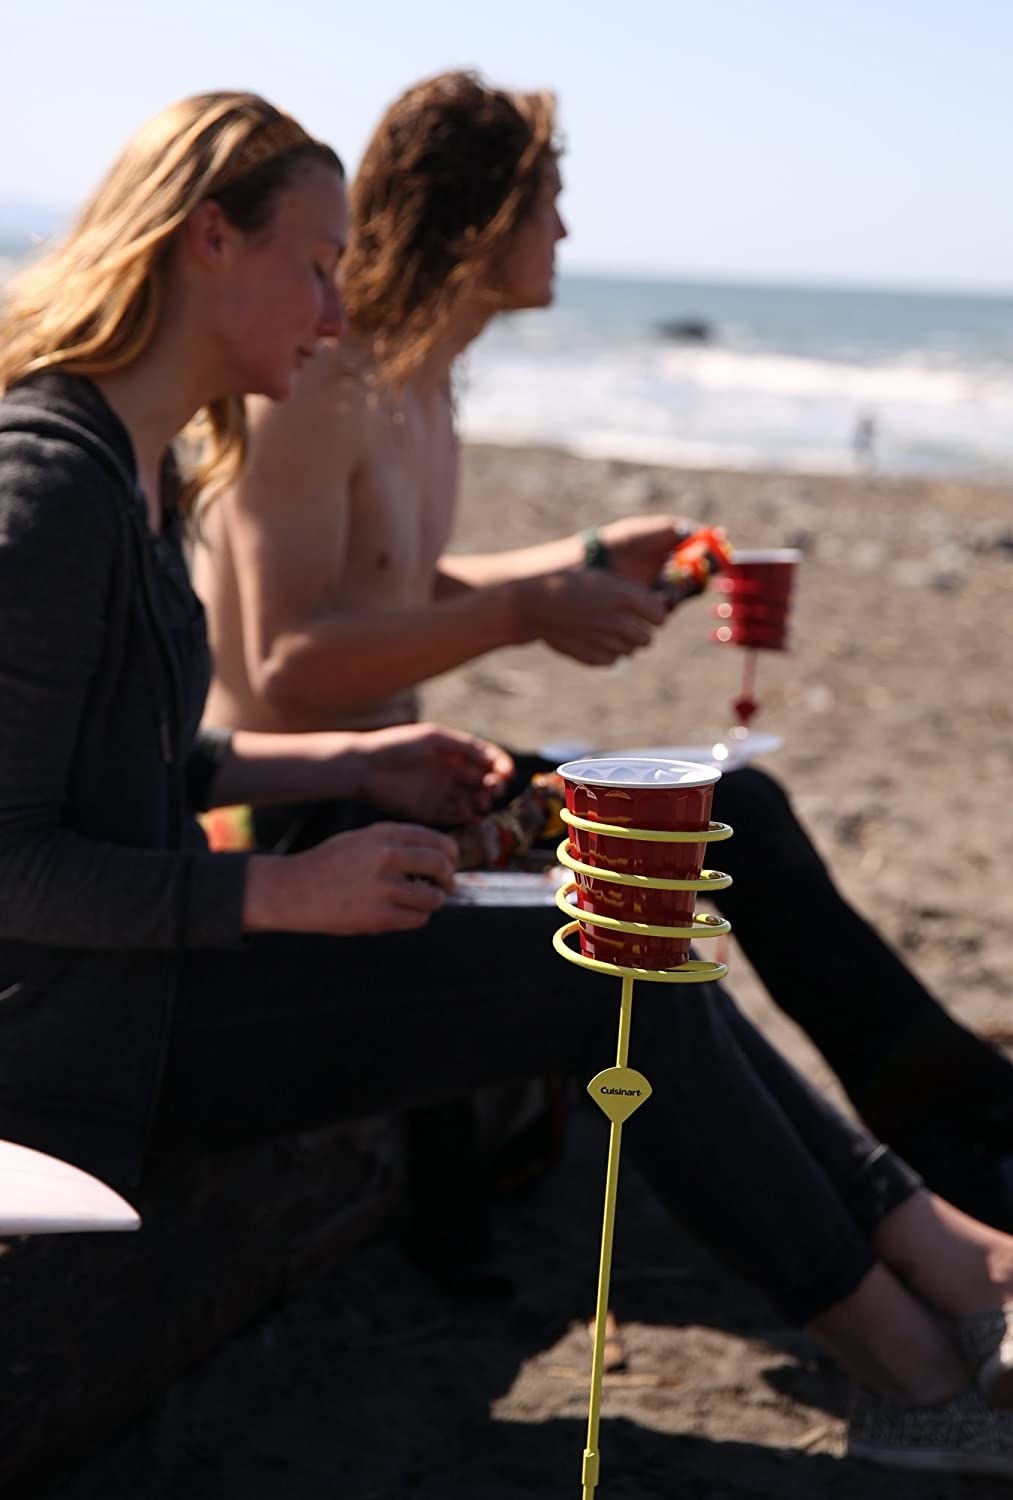 The drink holder, which comes up to seat-height